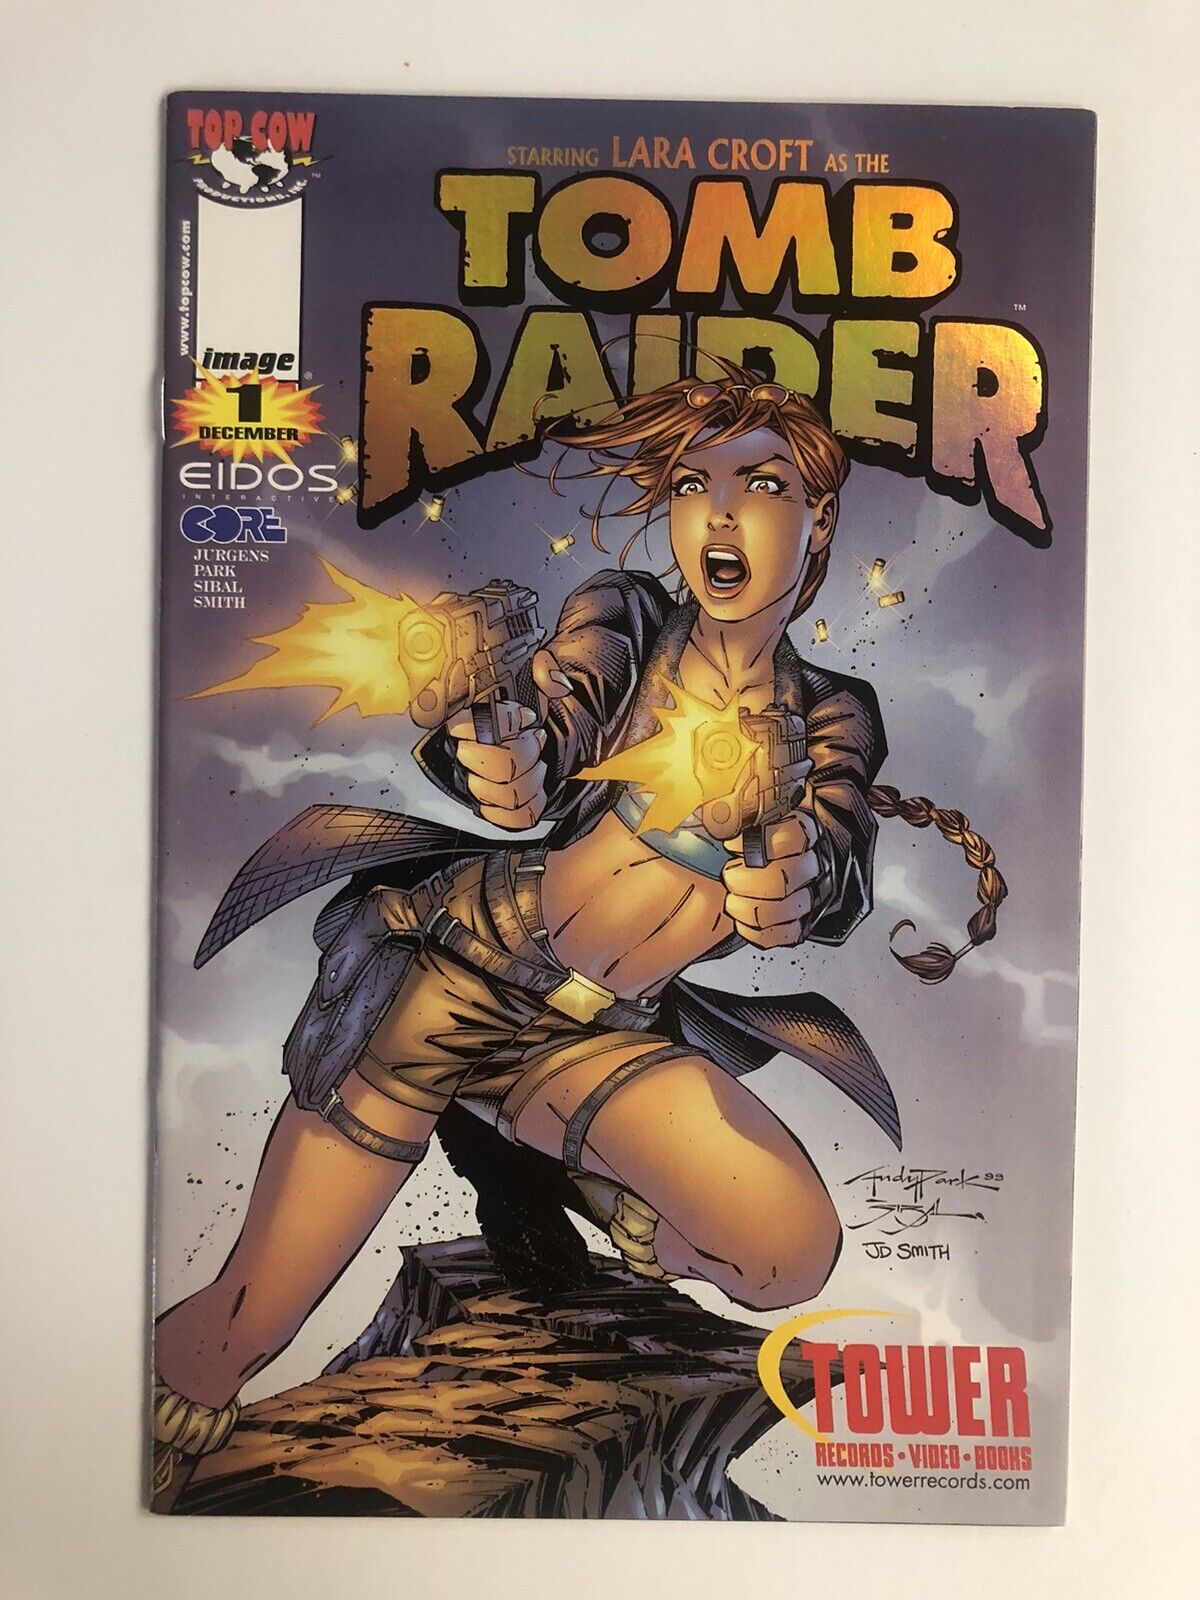 Tomb Raider  #1 Image Comics 1999 Tower Records Exclusive Gold Foil